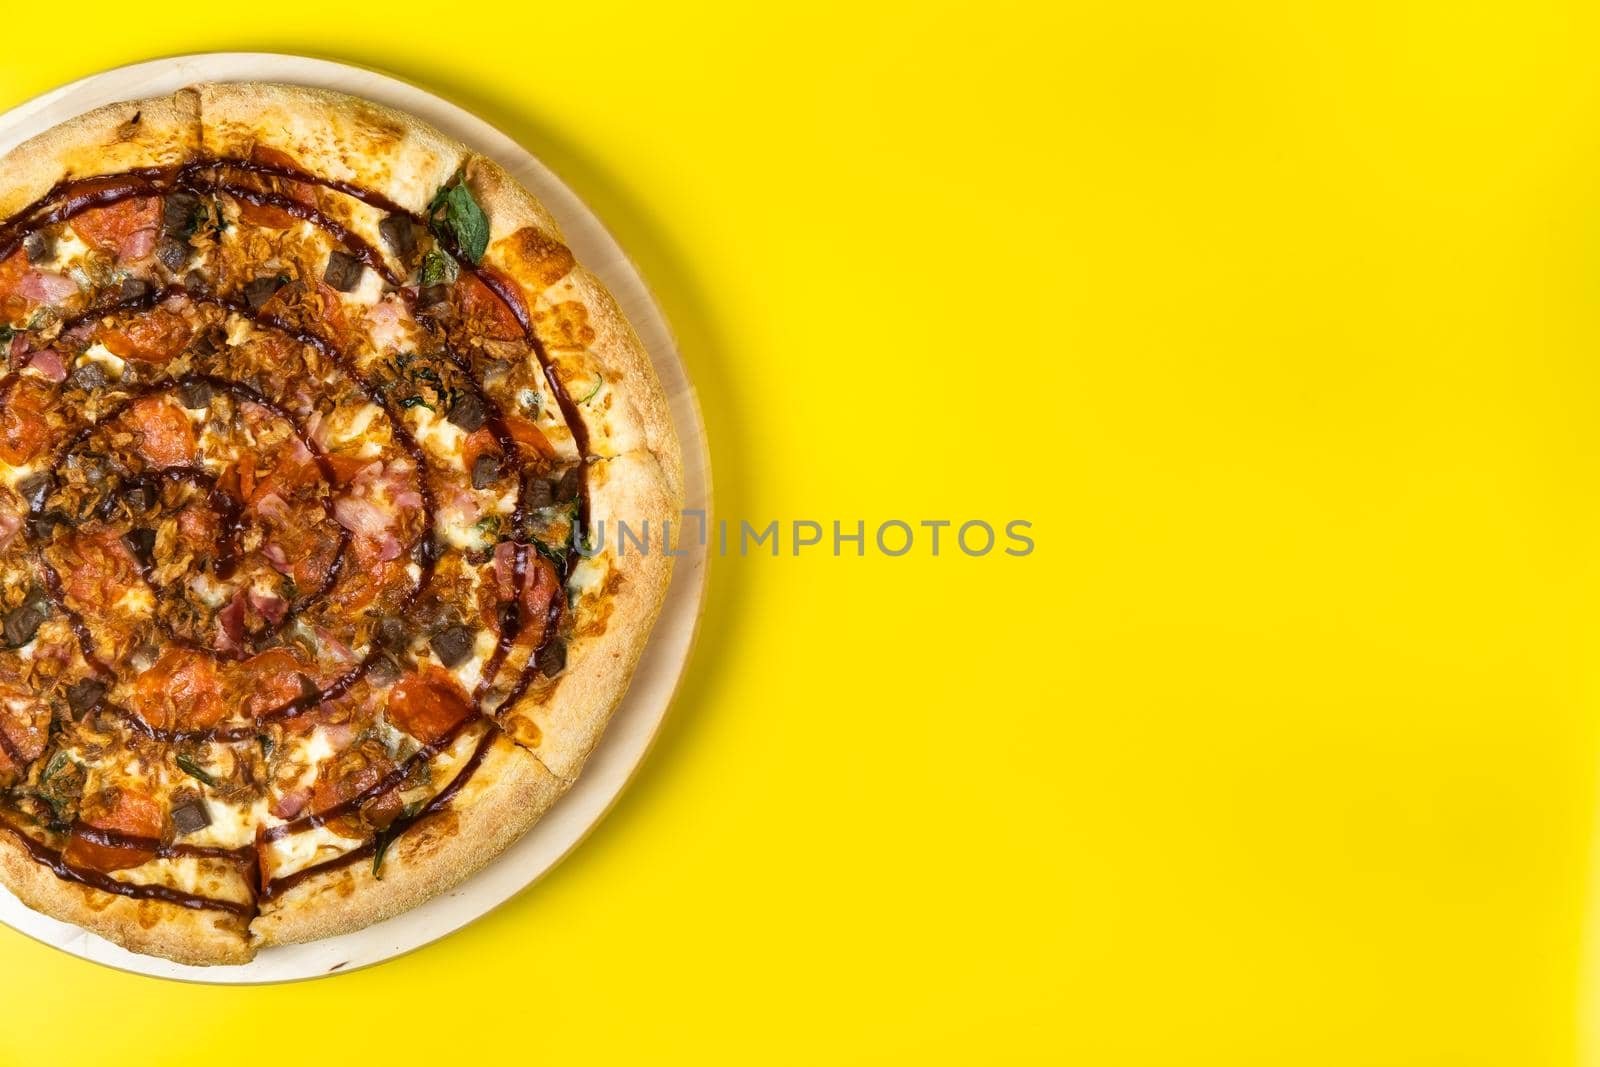 Delicious large pizza with bacon and spinach on a yellow background.